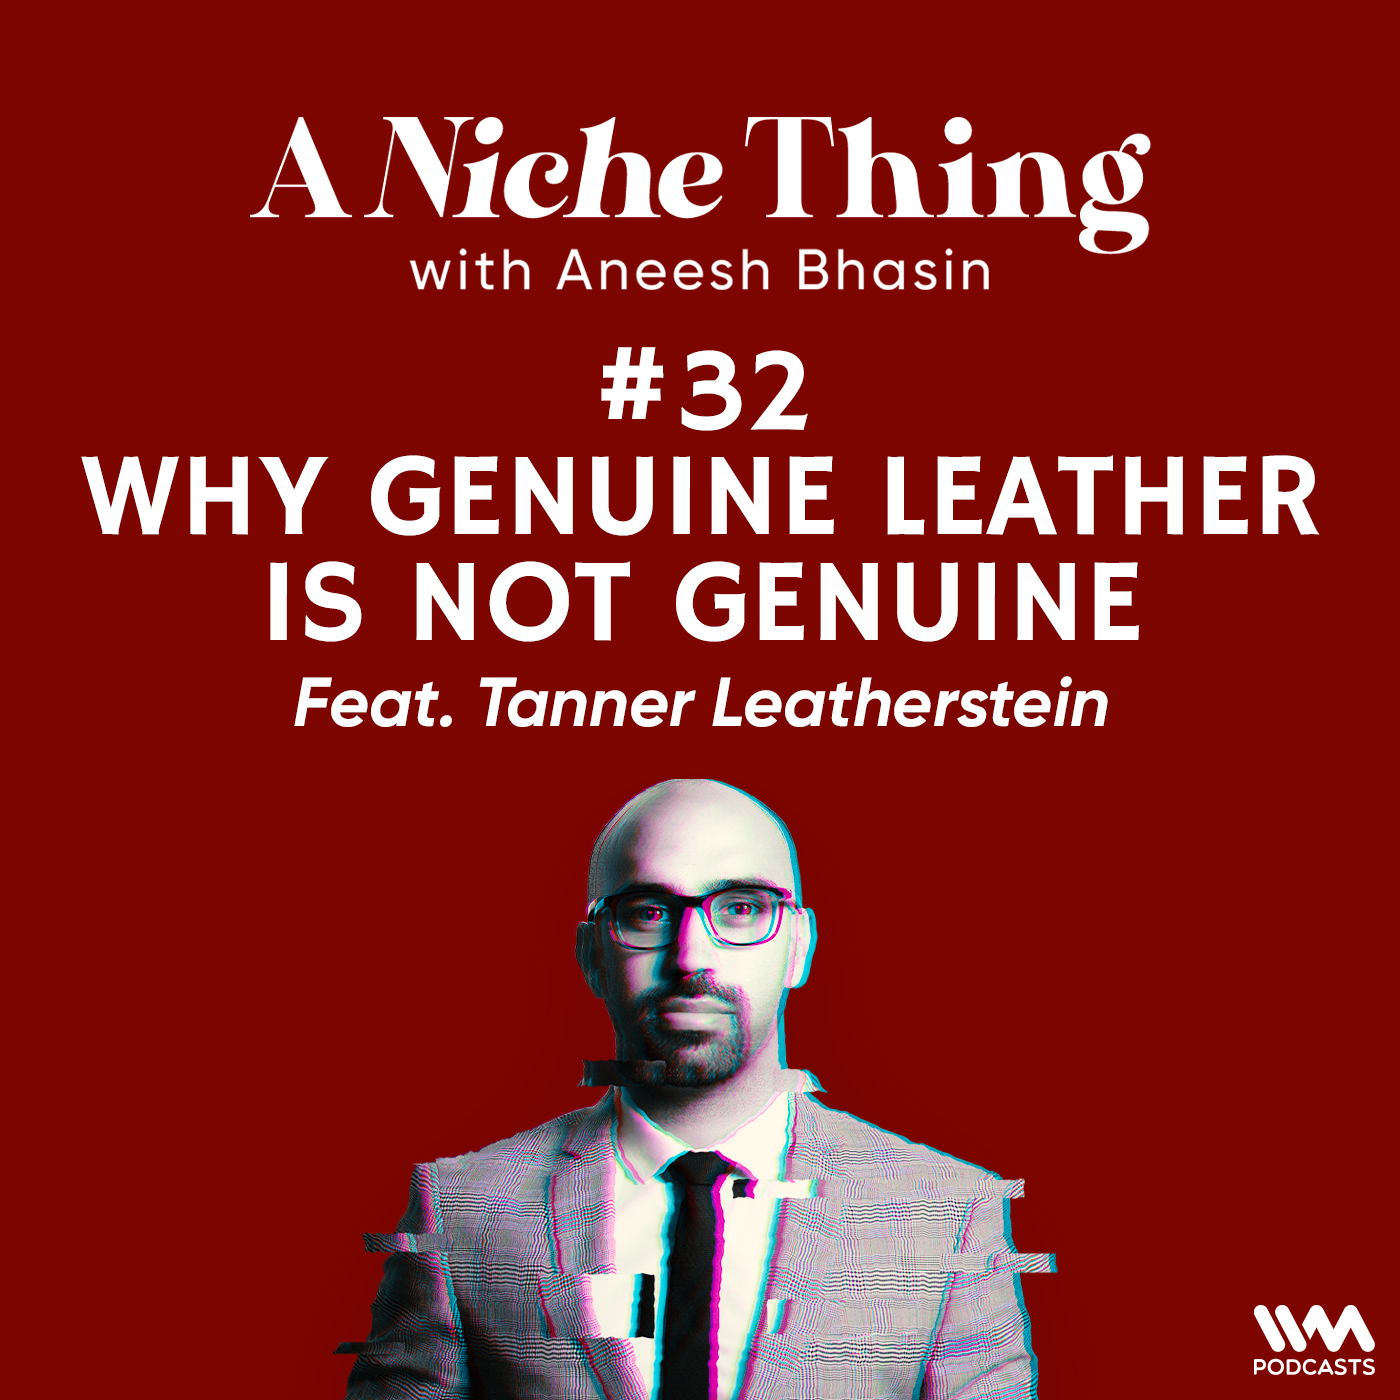 Why Genuine Leather is not Genuine